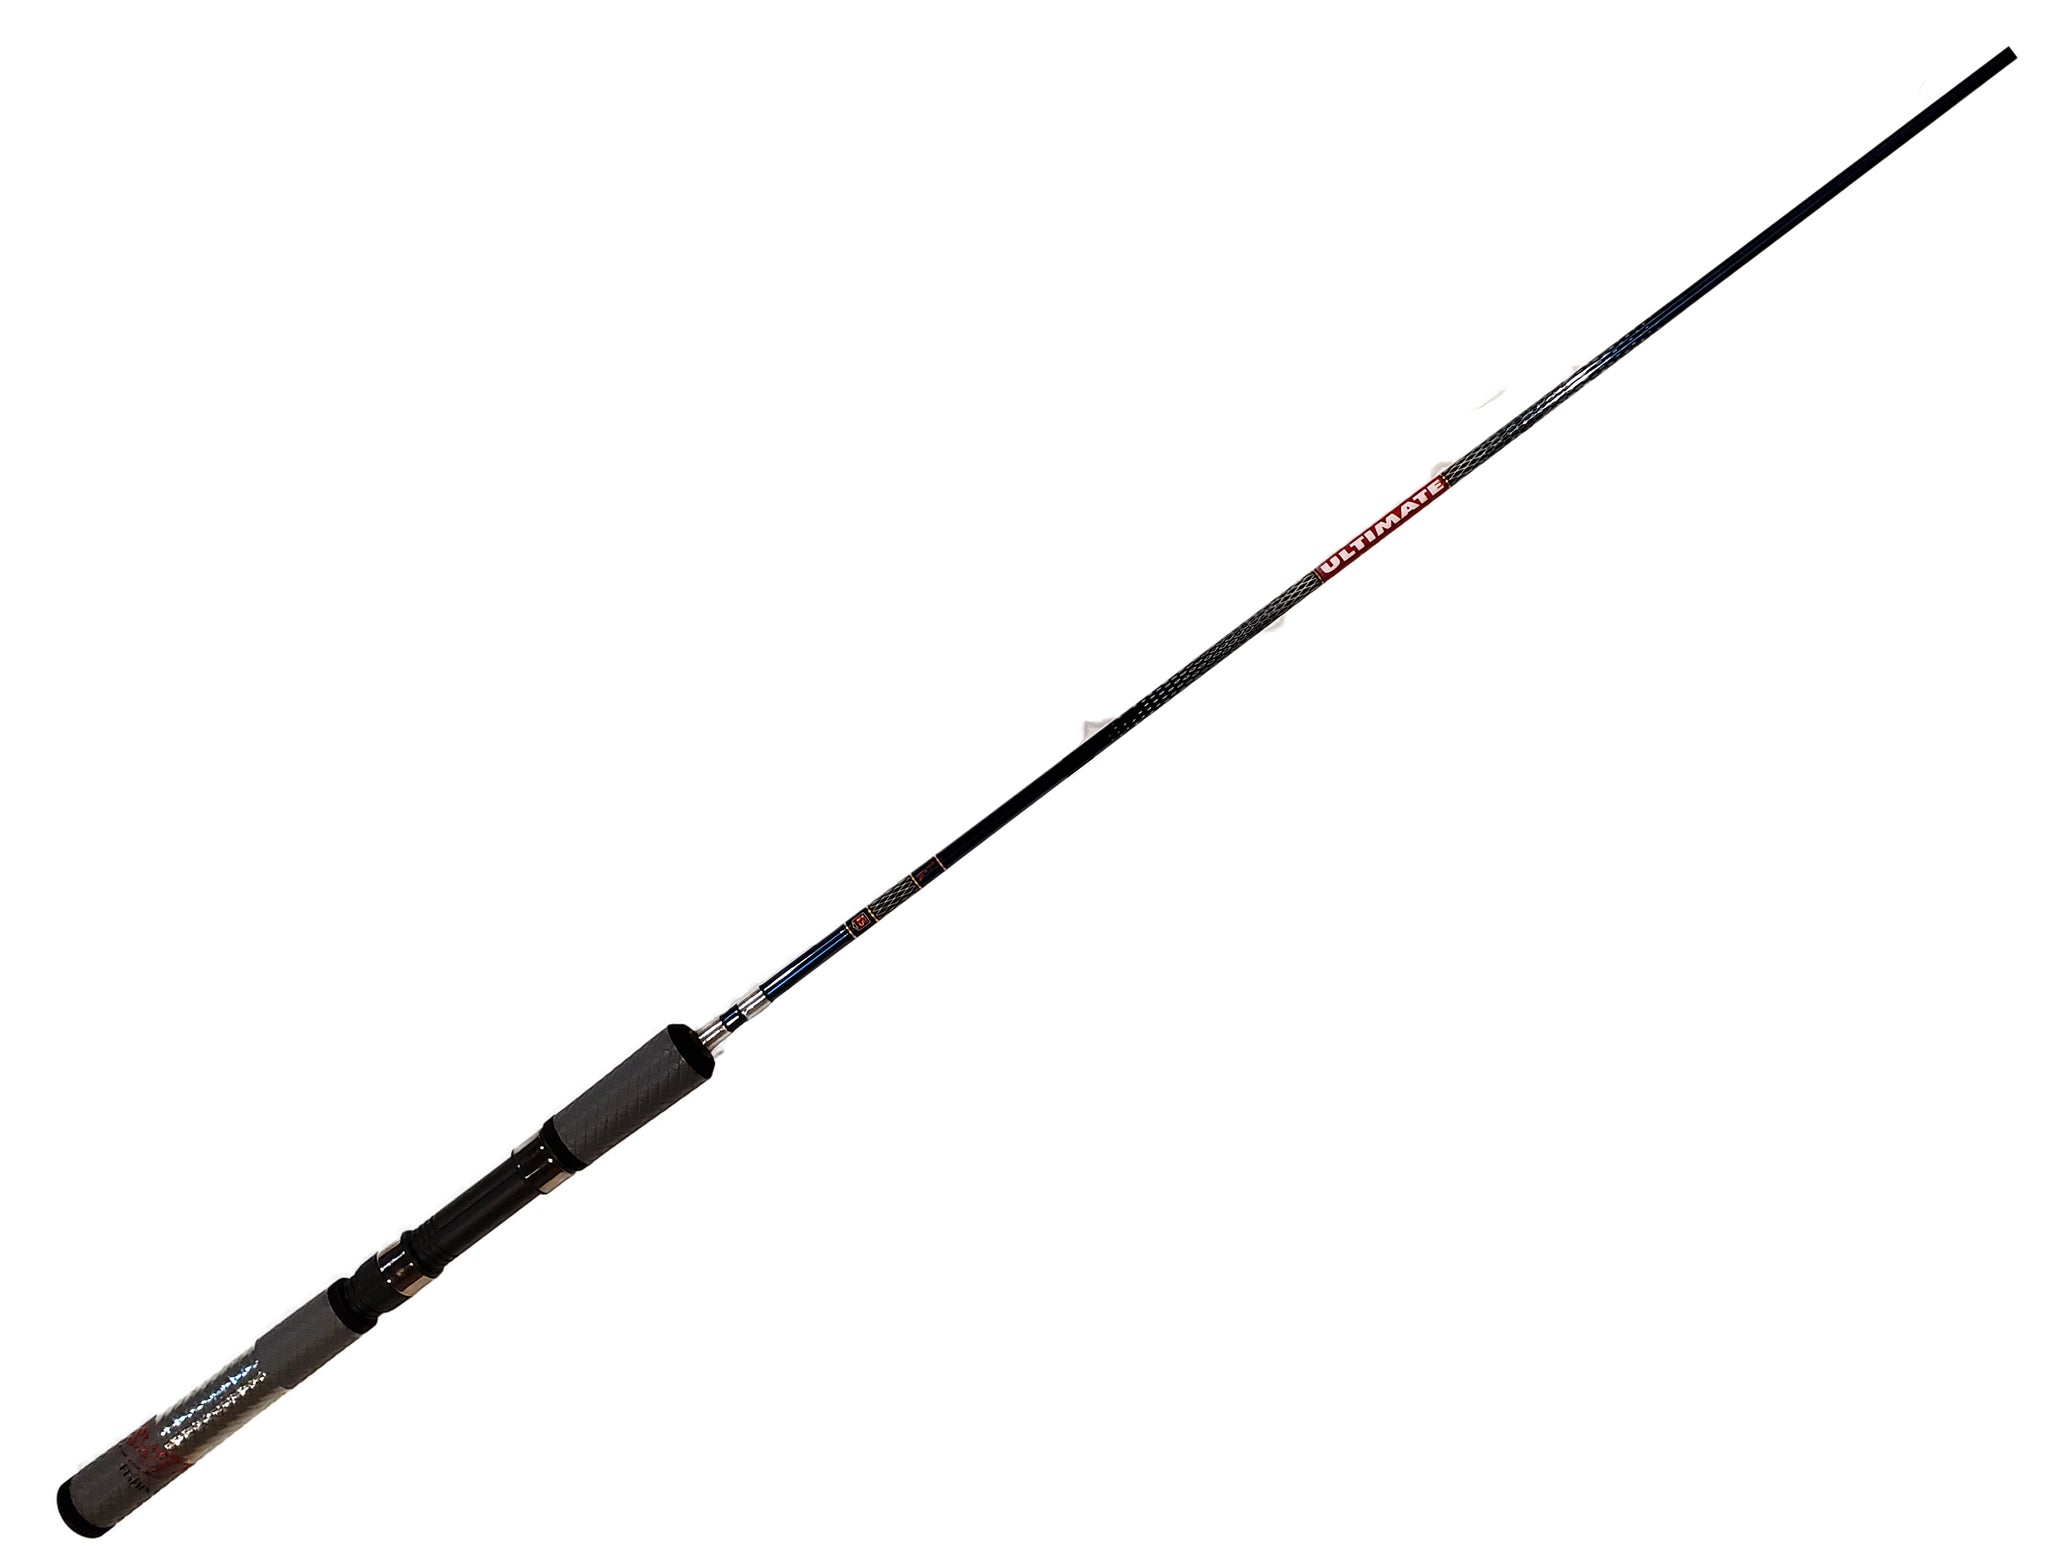 Buck's Graphite 6 ft. Spinning Rod Crappie Combo by B'n'M Pole